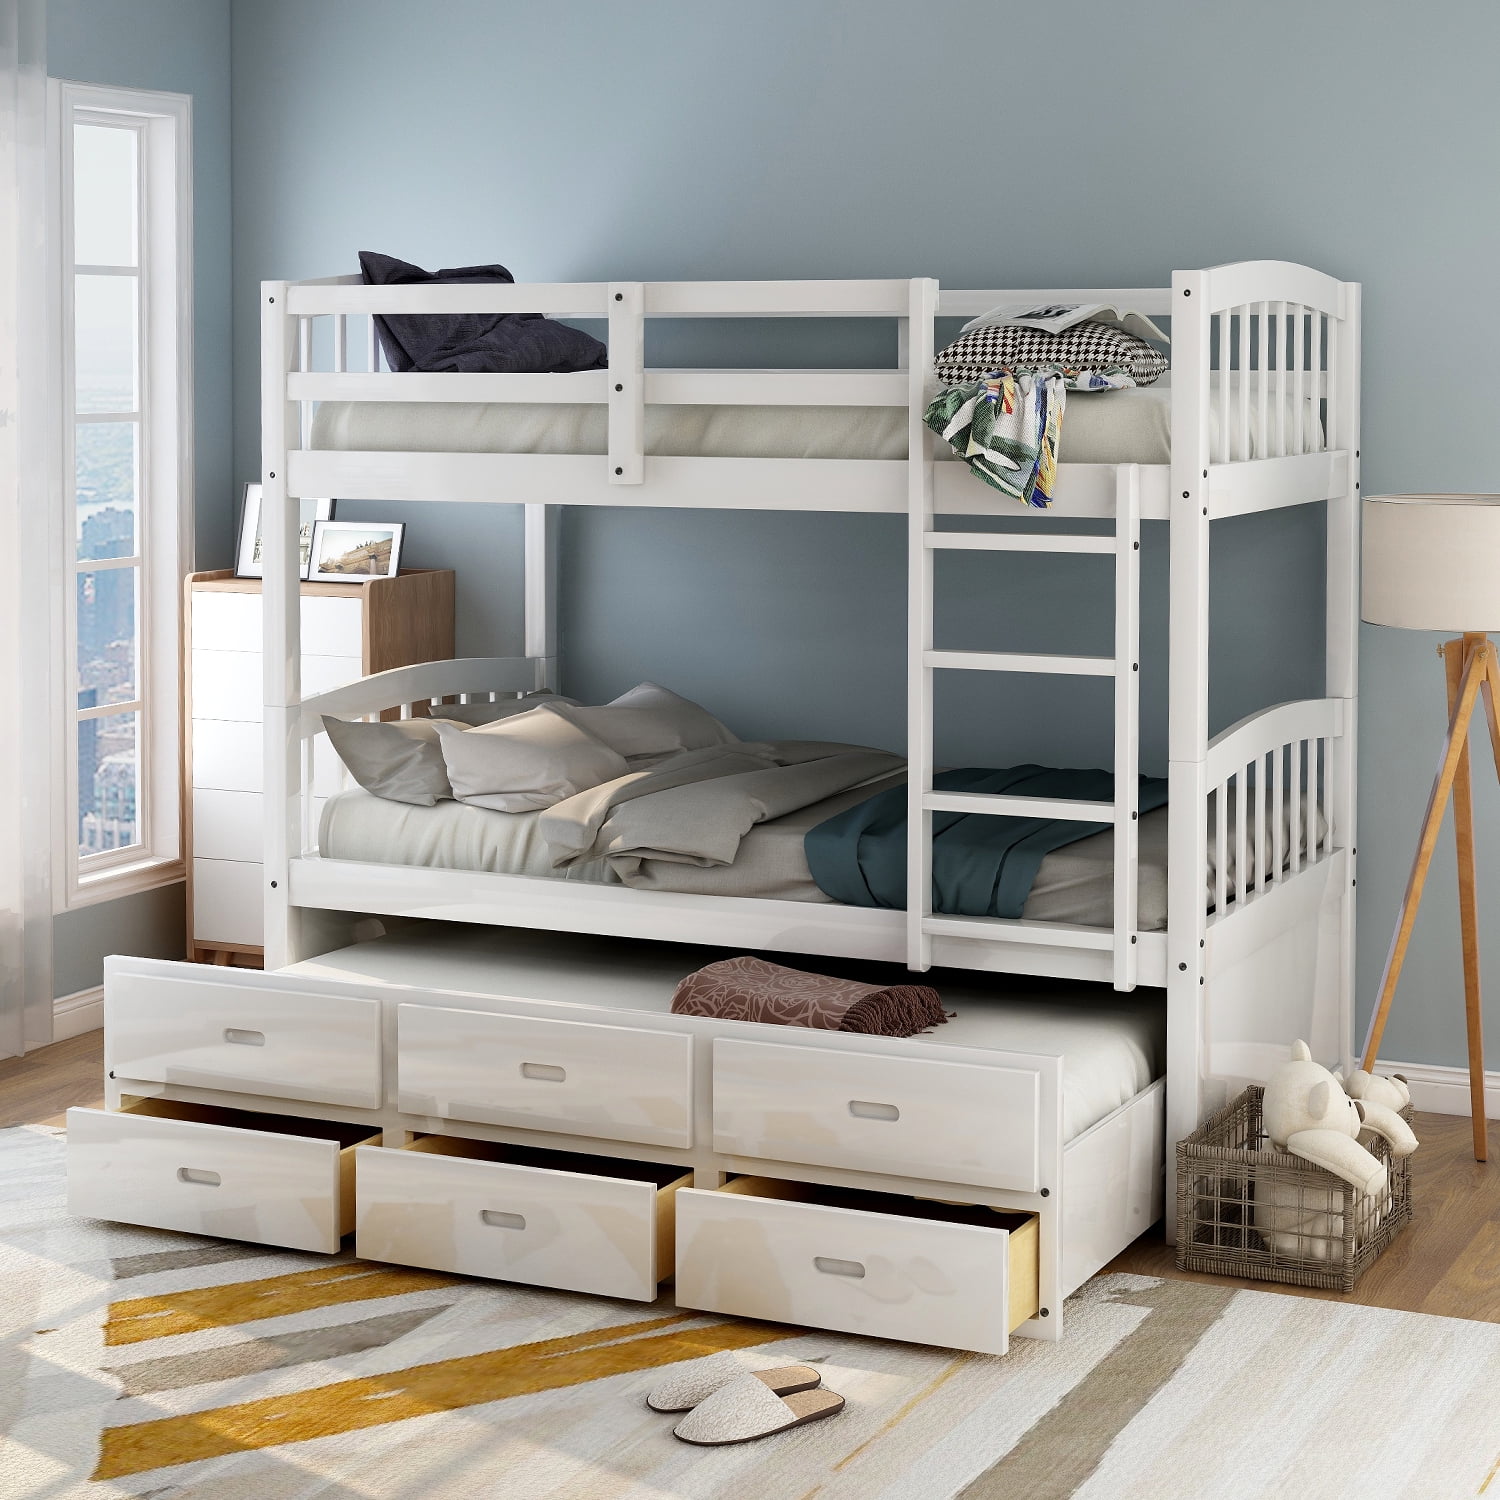 Euroco Twin Over Wood Bunk Bed, Twin Bunk Bed With Storage Underneath